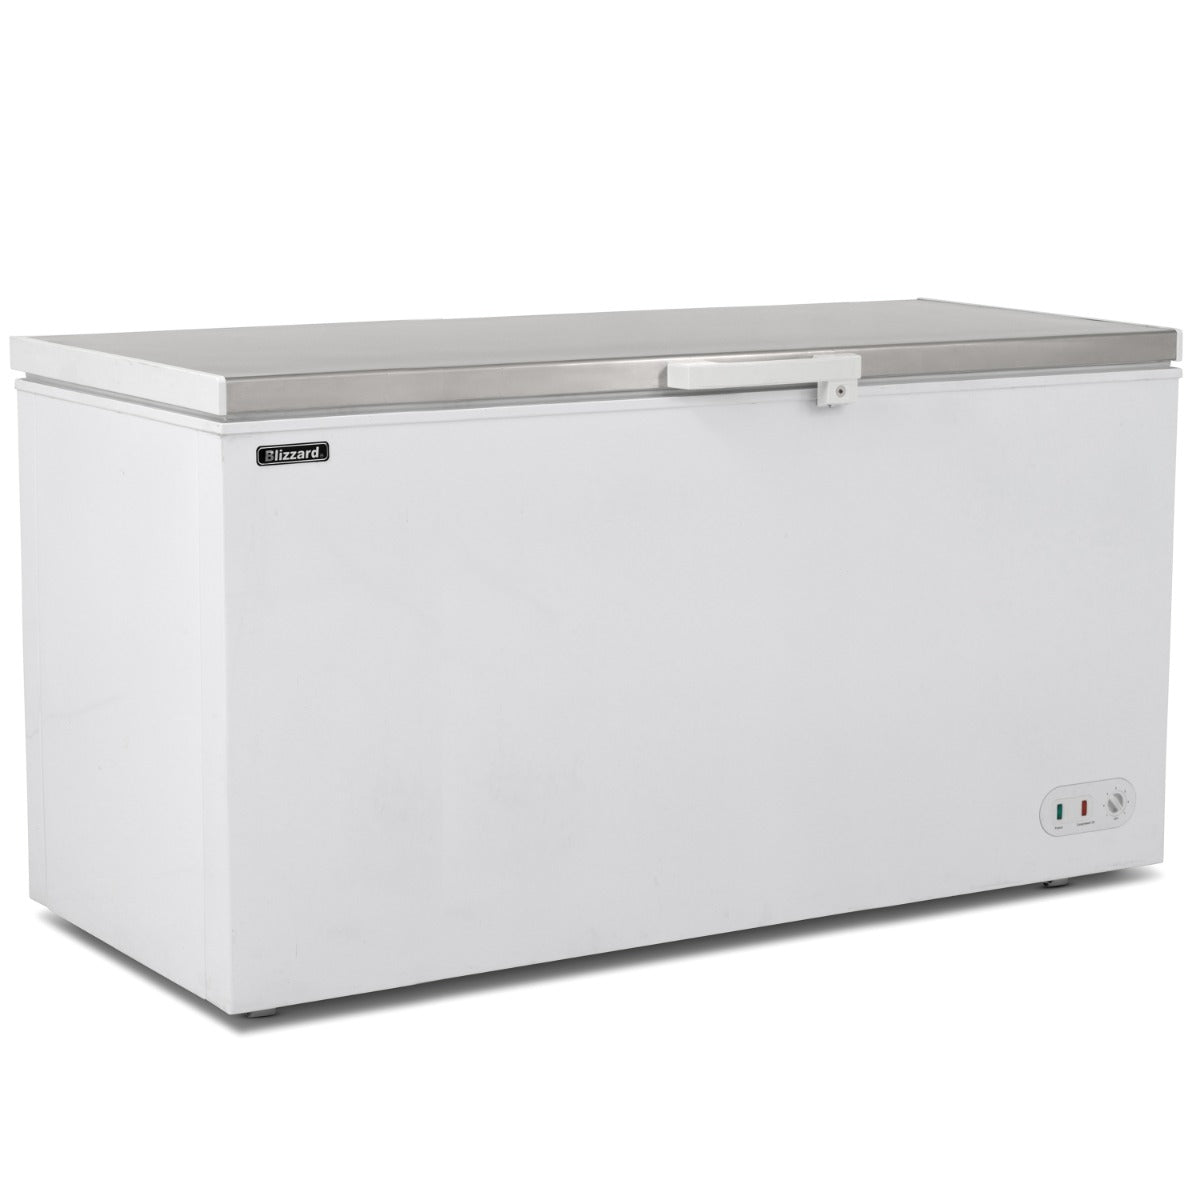 Blizzard Stainless Steel Lid Chest Freezer 650L